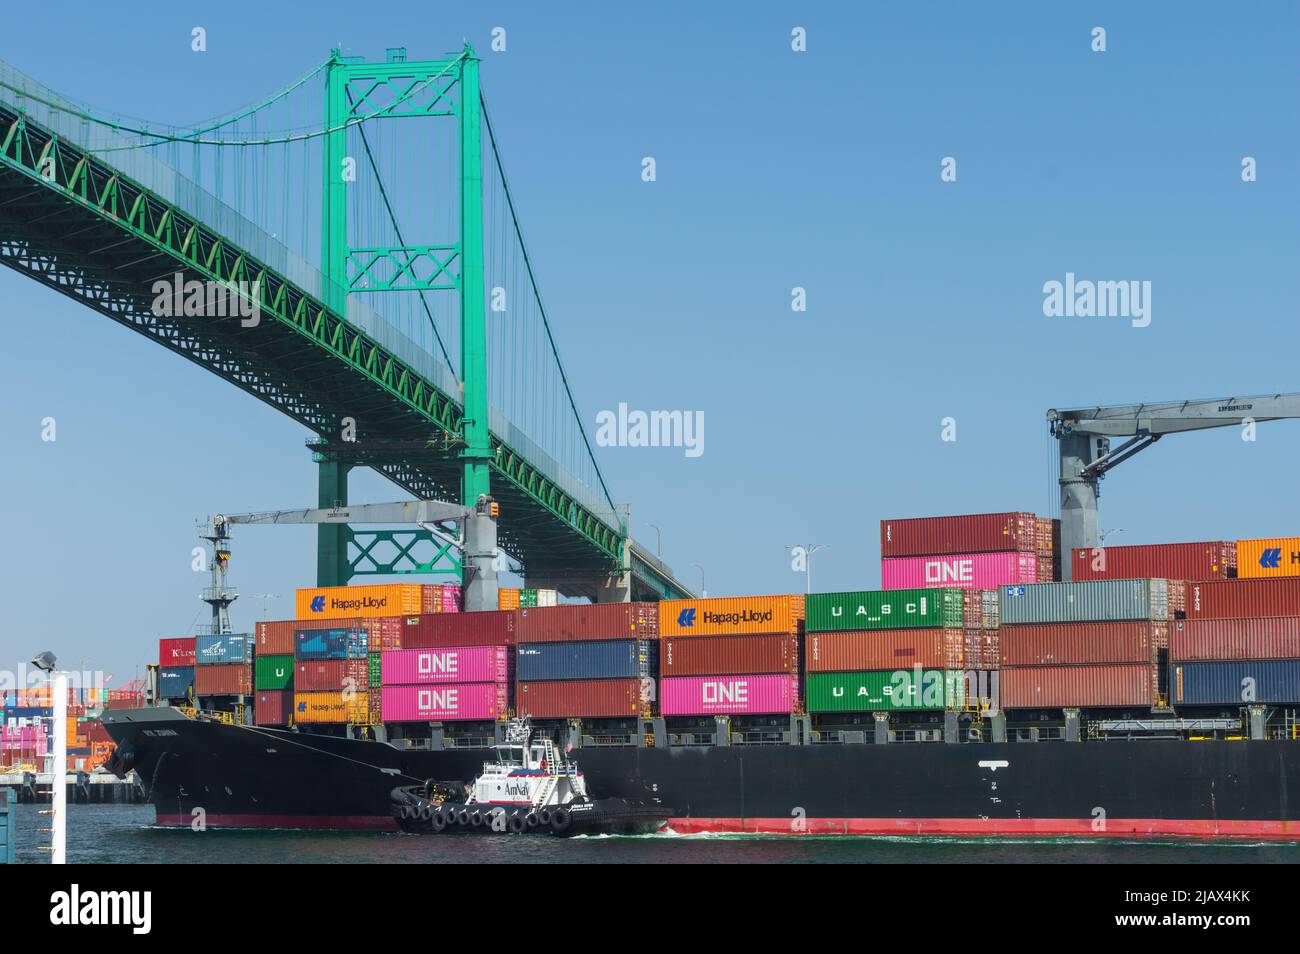 Port of Los Angeles, California, USA - April 27, 2022: image of container ship NYK Joanna shown in transit under the Vincent Thomas Bridge on a sunny Stock Photo